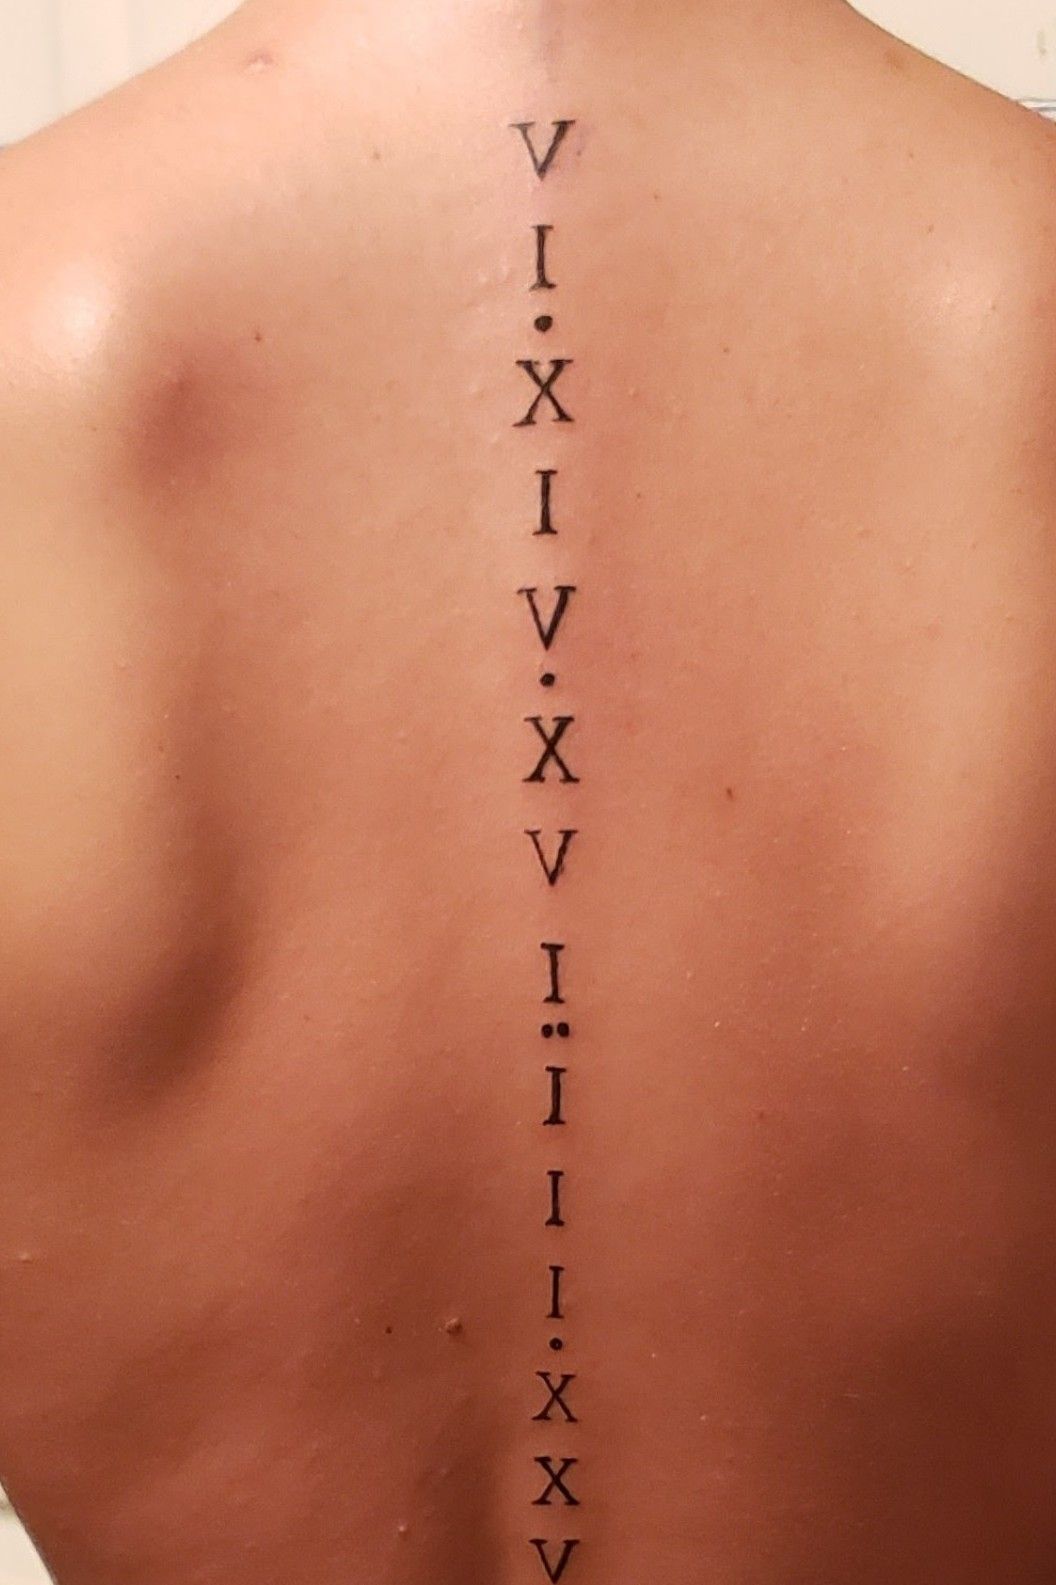 Red Raven Tattoo and Piercing Studio  Super clean roman numerals by Amel  like share comment ty  Facebook